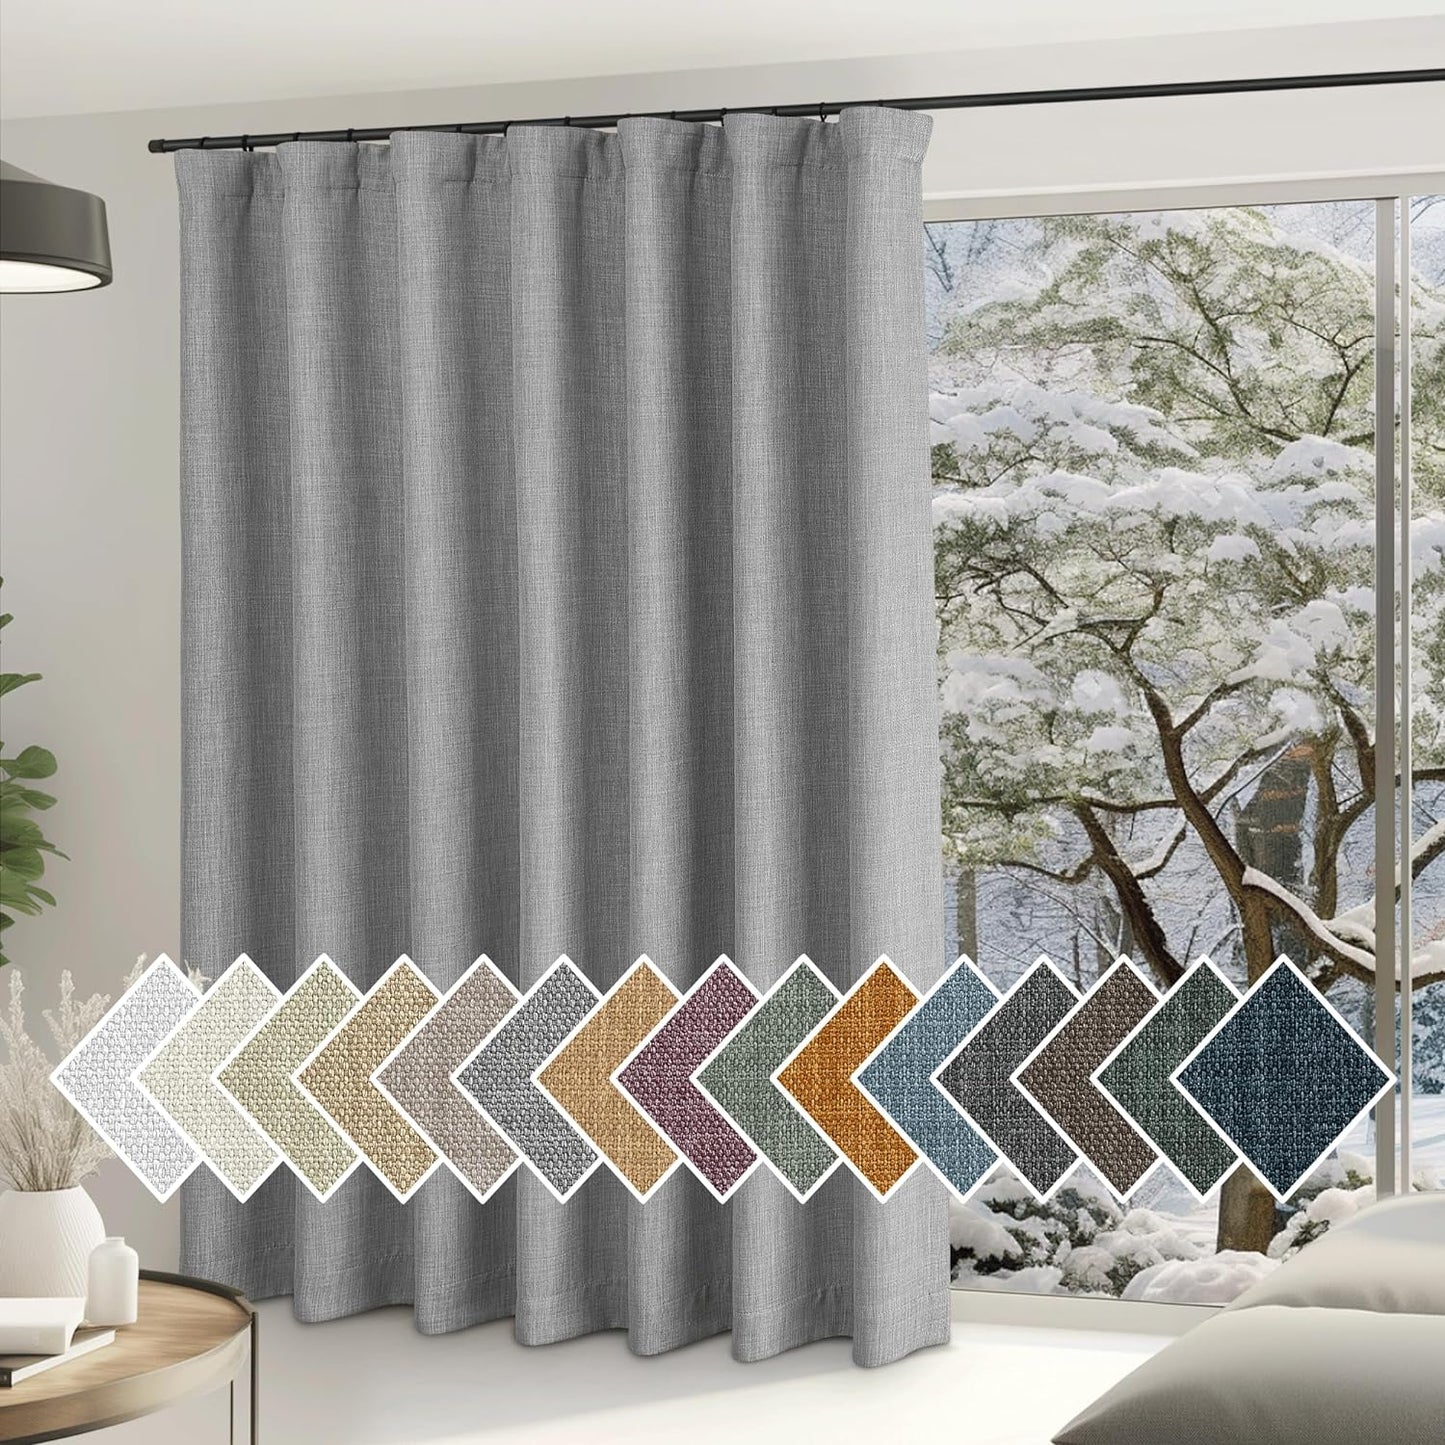 NICETOWN Sliding Door Curtains 84 Inch Length for Bedroom, Room Darkening Hook Belt/Rod Pocket/Back Tab Faux Linen Thermal Window Treatments for Living Room, Natural, W100 X L84, 1 Panel  NICETOWN Light Grey W100 X L84 